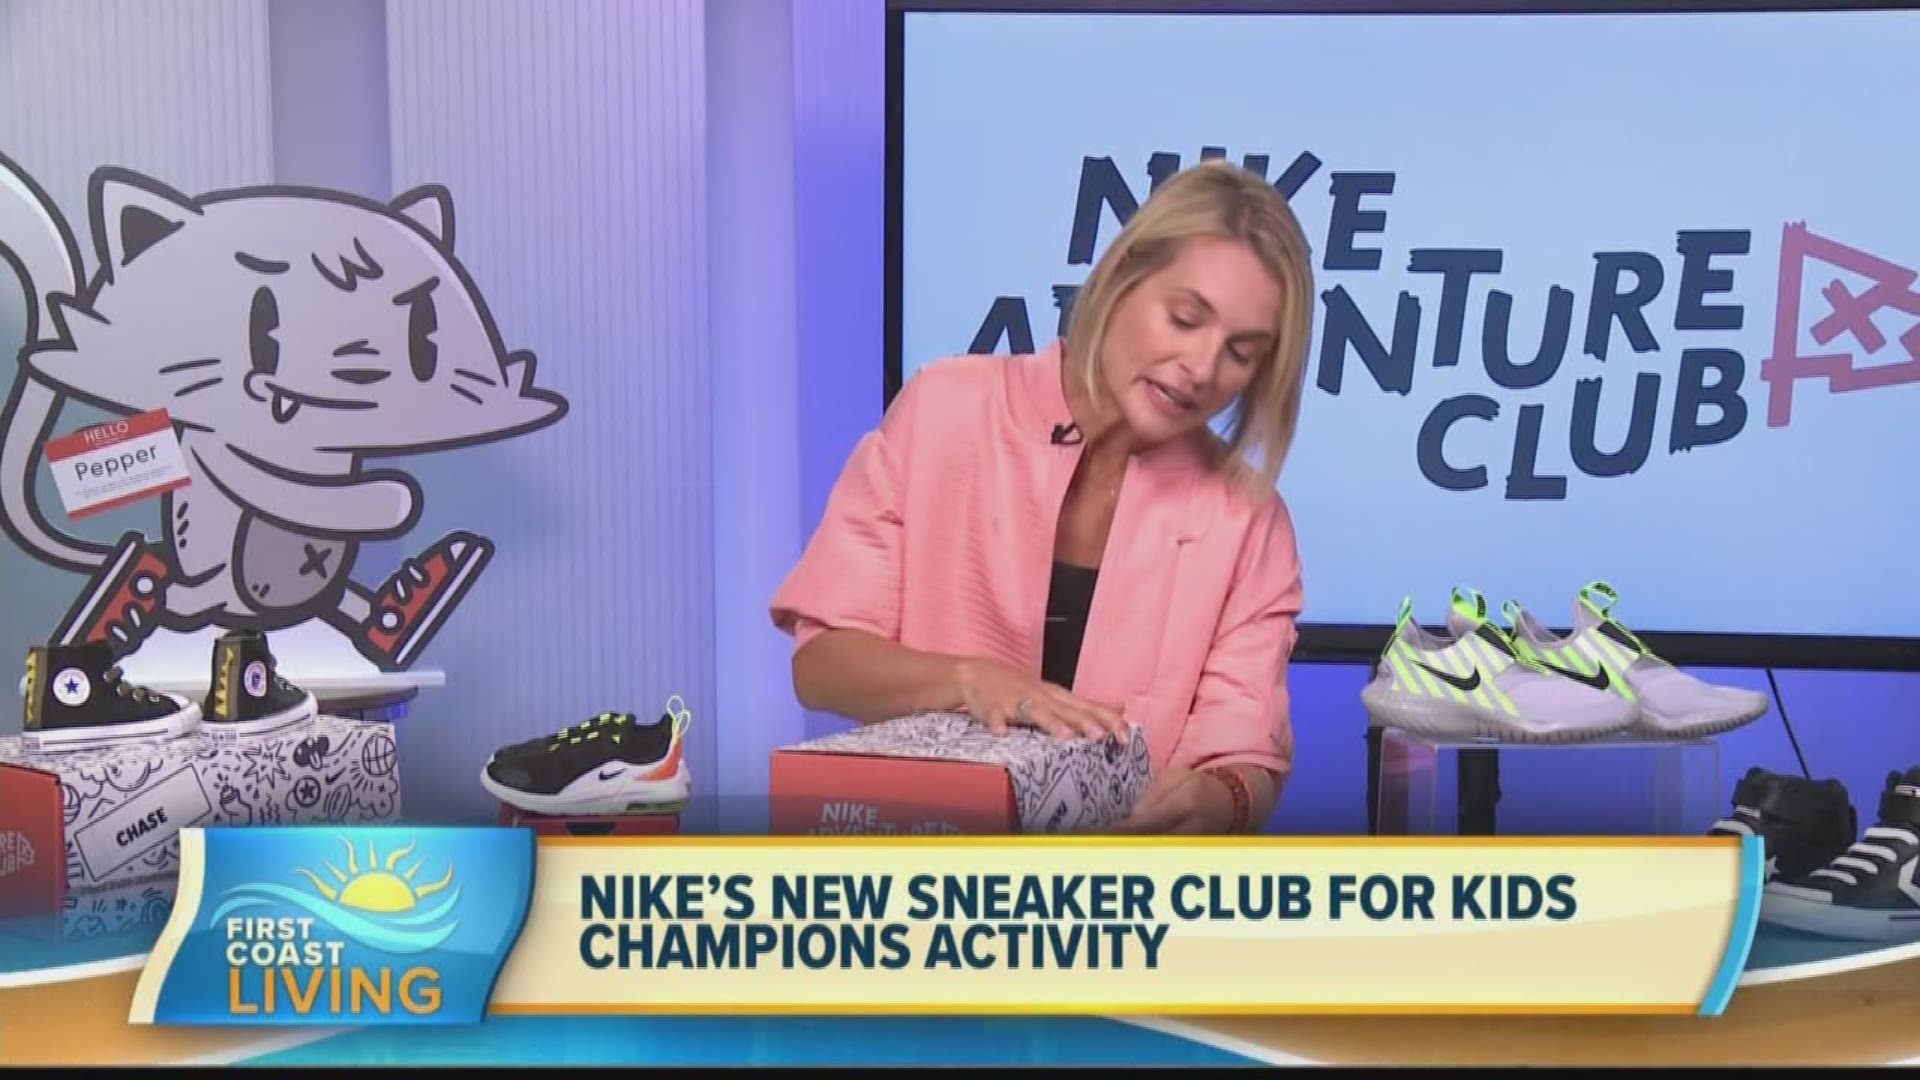 Nike’s New Sneaker Club for Kids Champions Activity and Exploration!